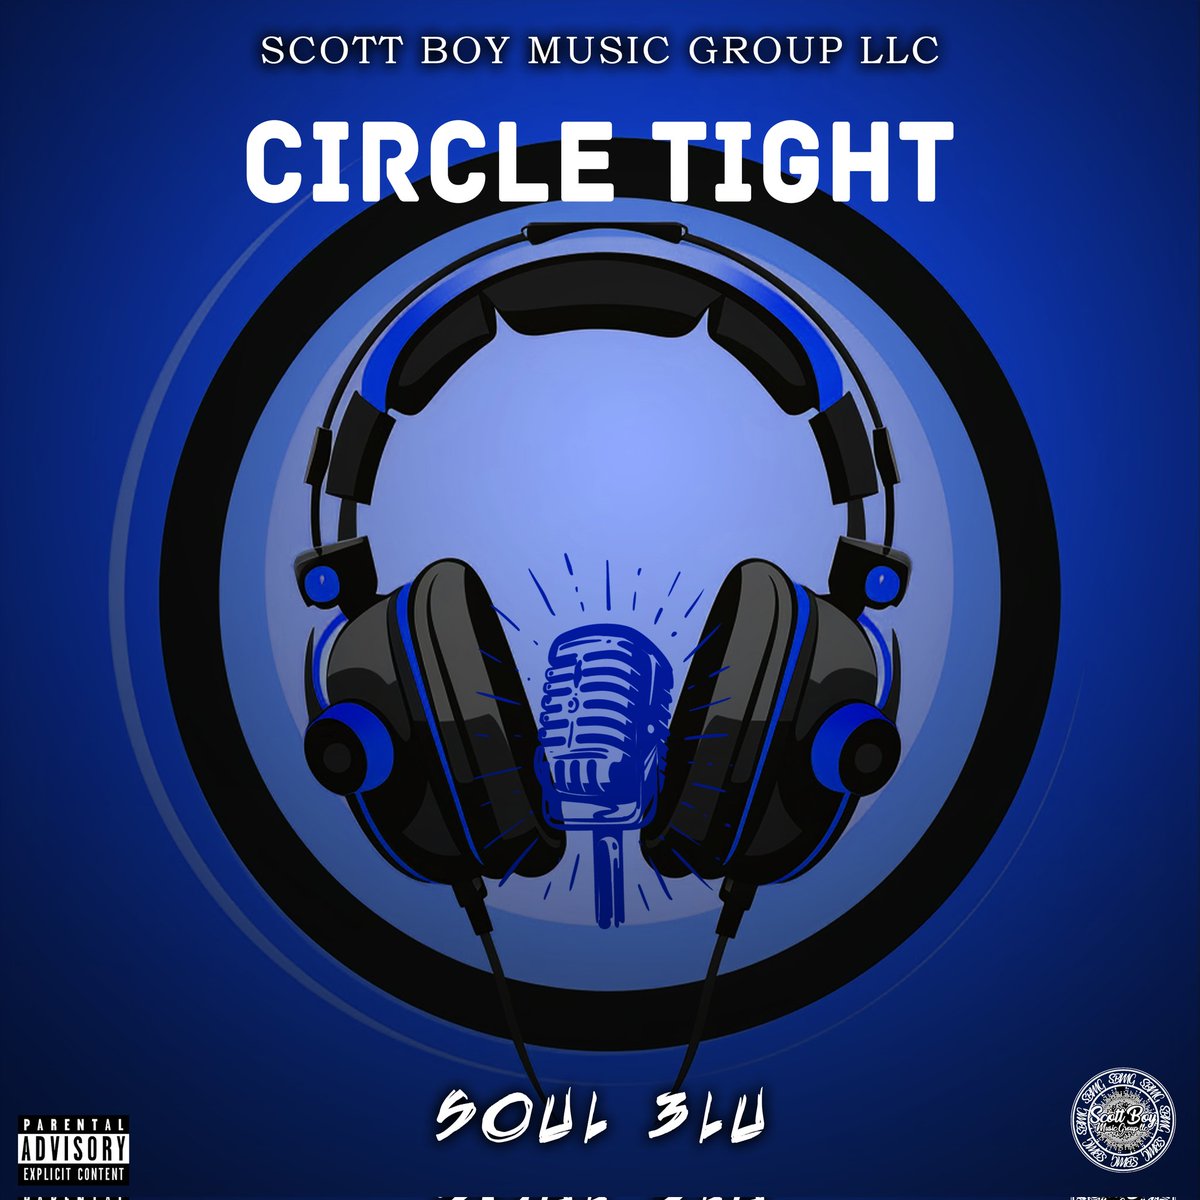 'CIRCLE TIGHT' BY @Soul3lu2 IS OUT NOW ON ALL STREAMING PLATFORMS @symphonicdist 
#NewMusicFriday #newsingle #newartist #rapmusic #rapsong